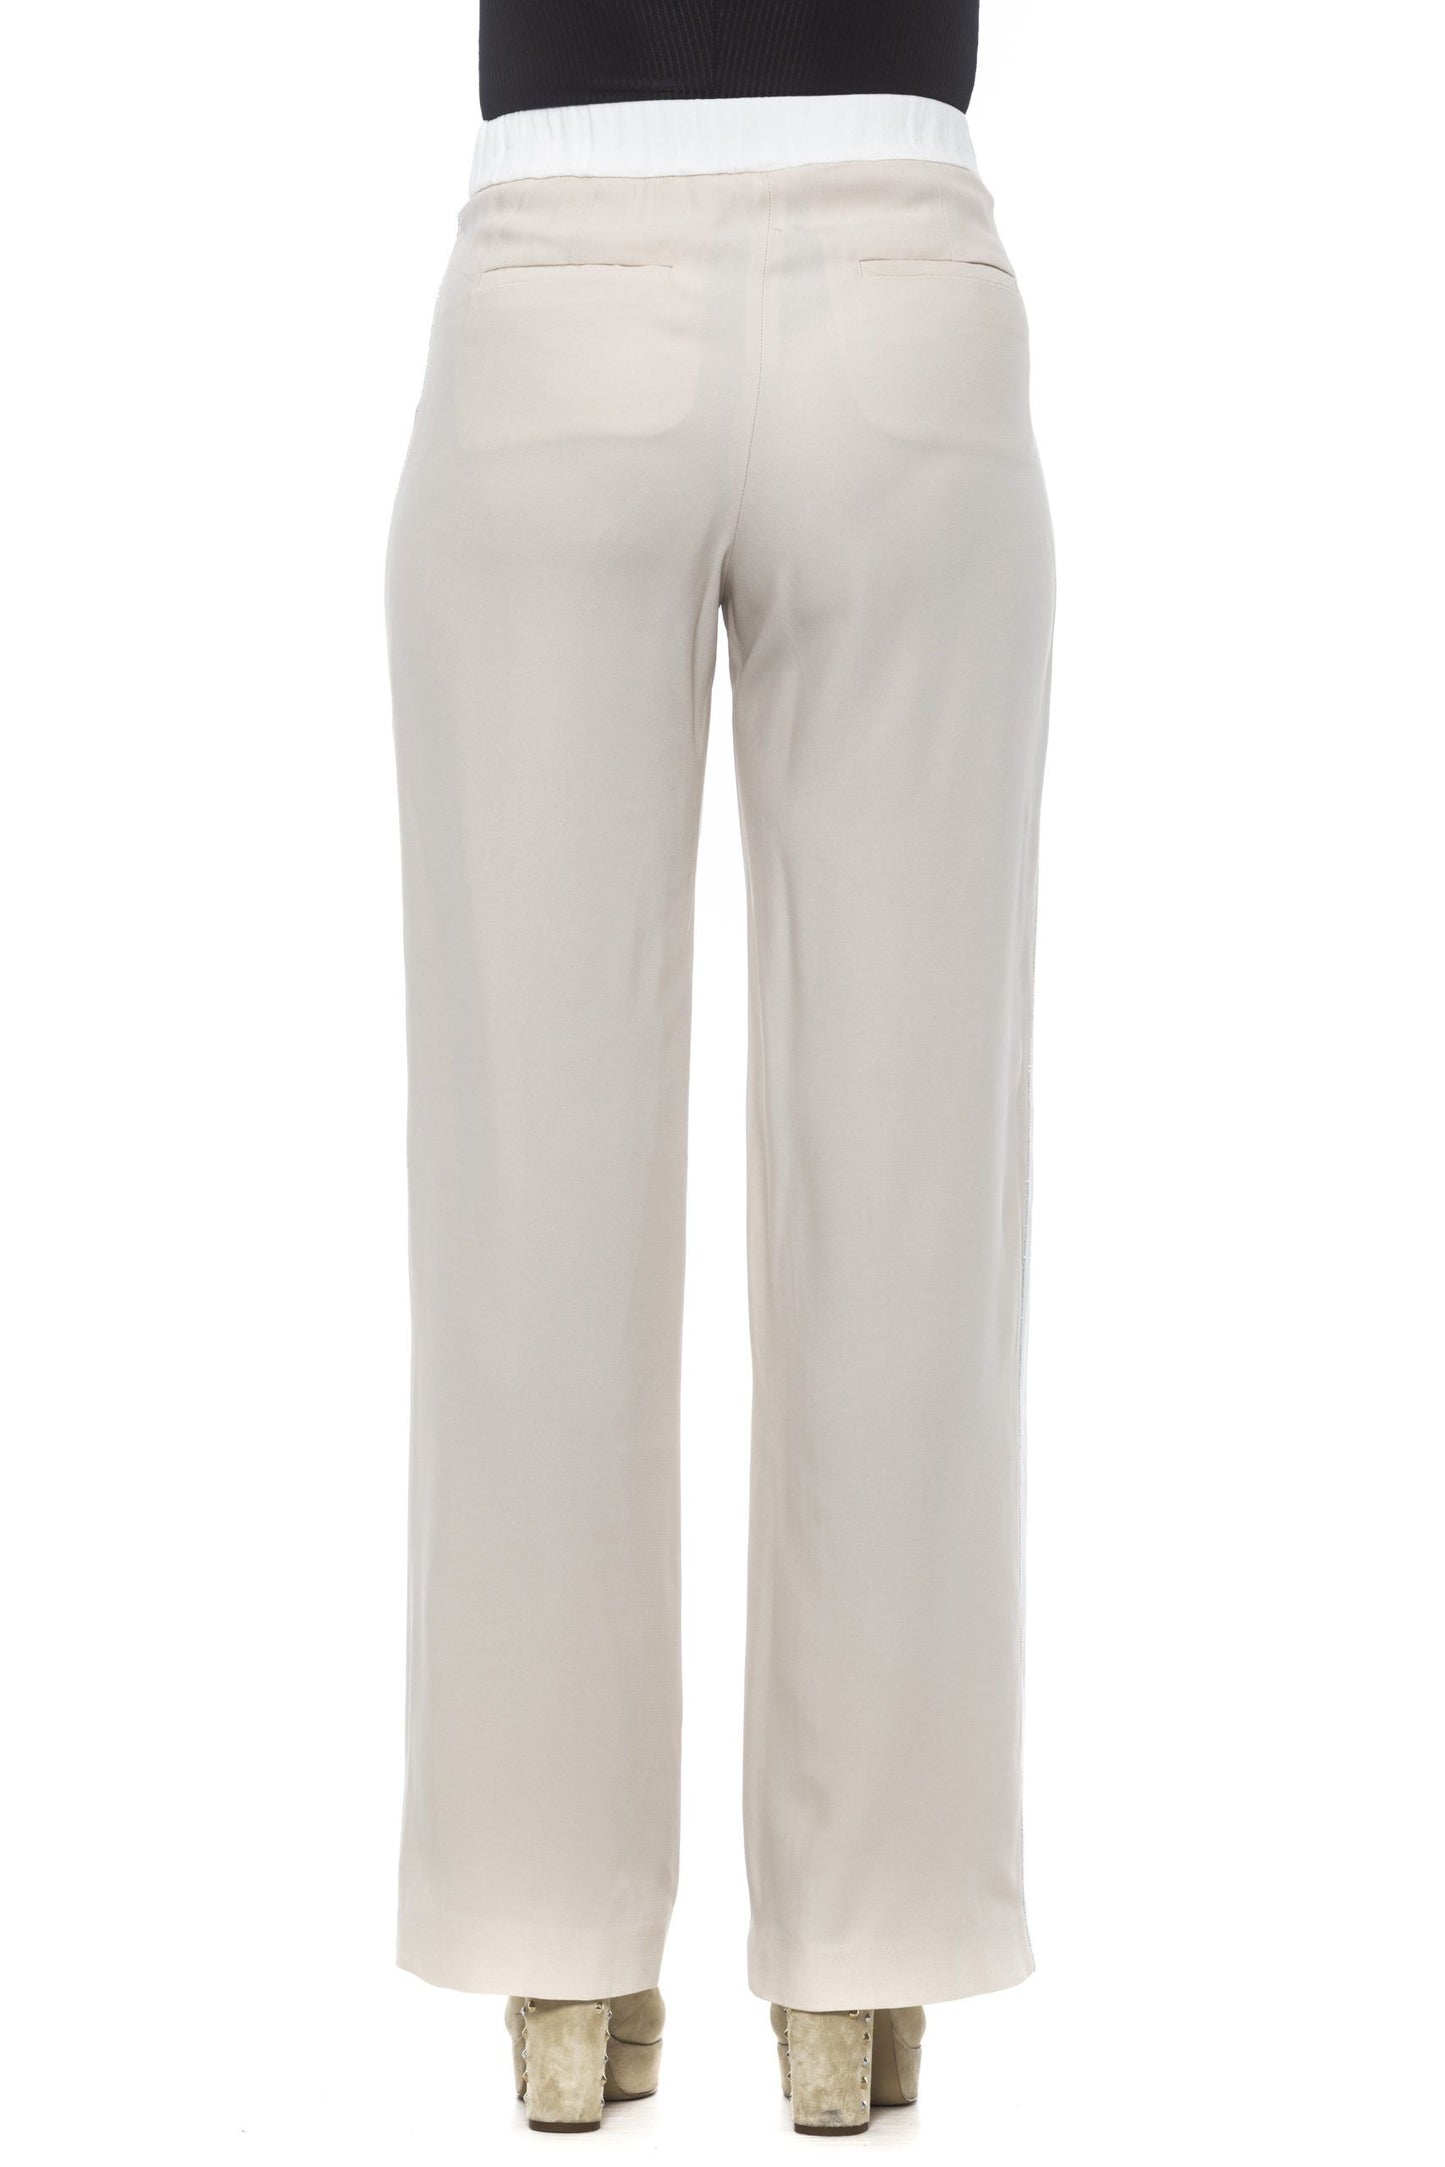 Chic Beige Palazzo Pants with Luminous Detailing